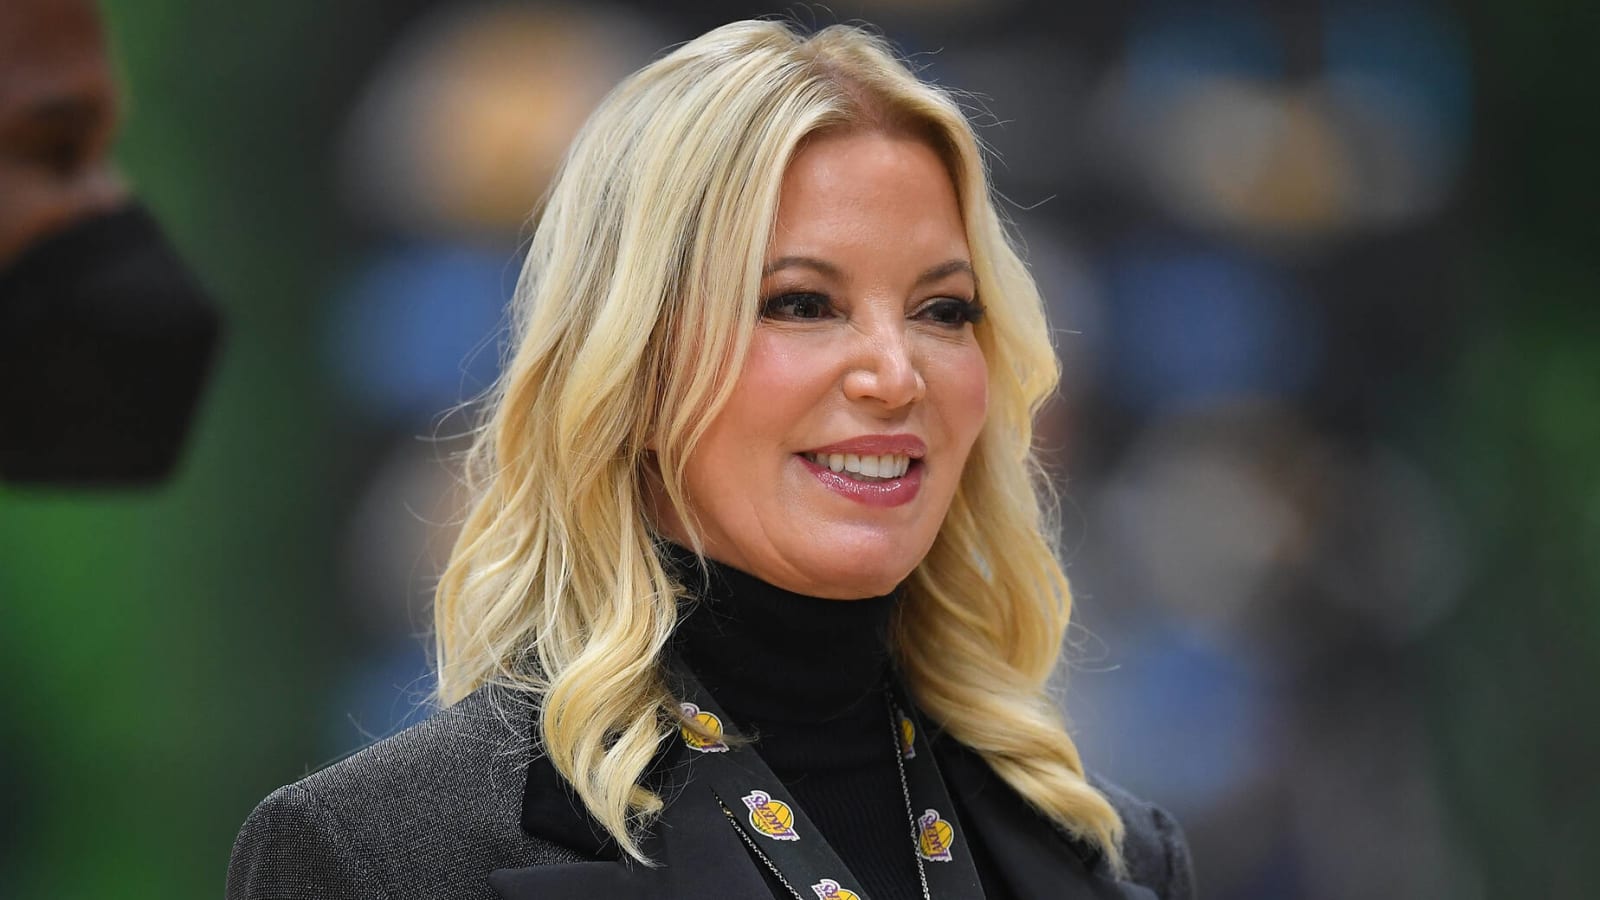 Stephen A. Smith calls out Lakers owner Jeanie Buss